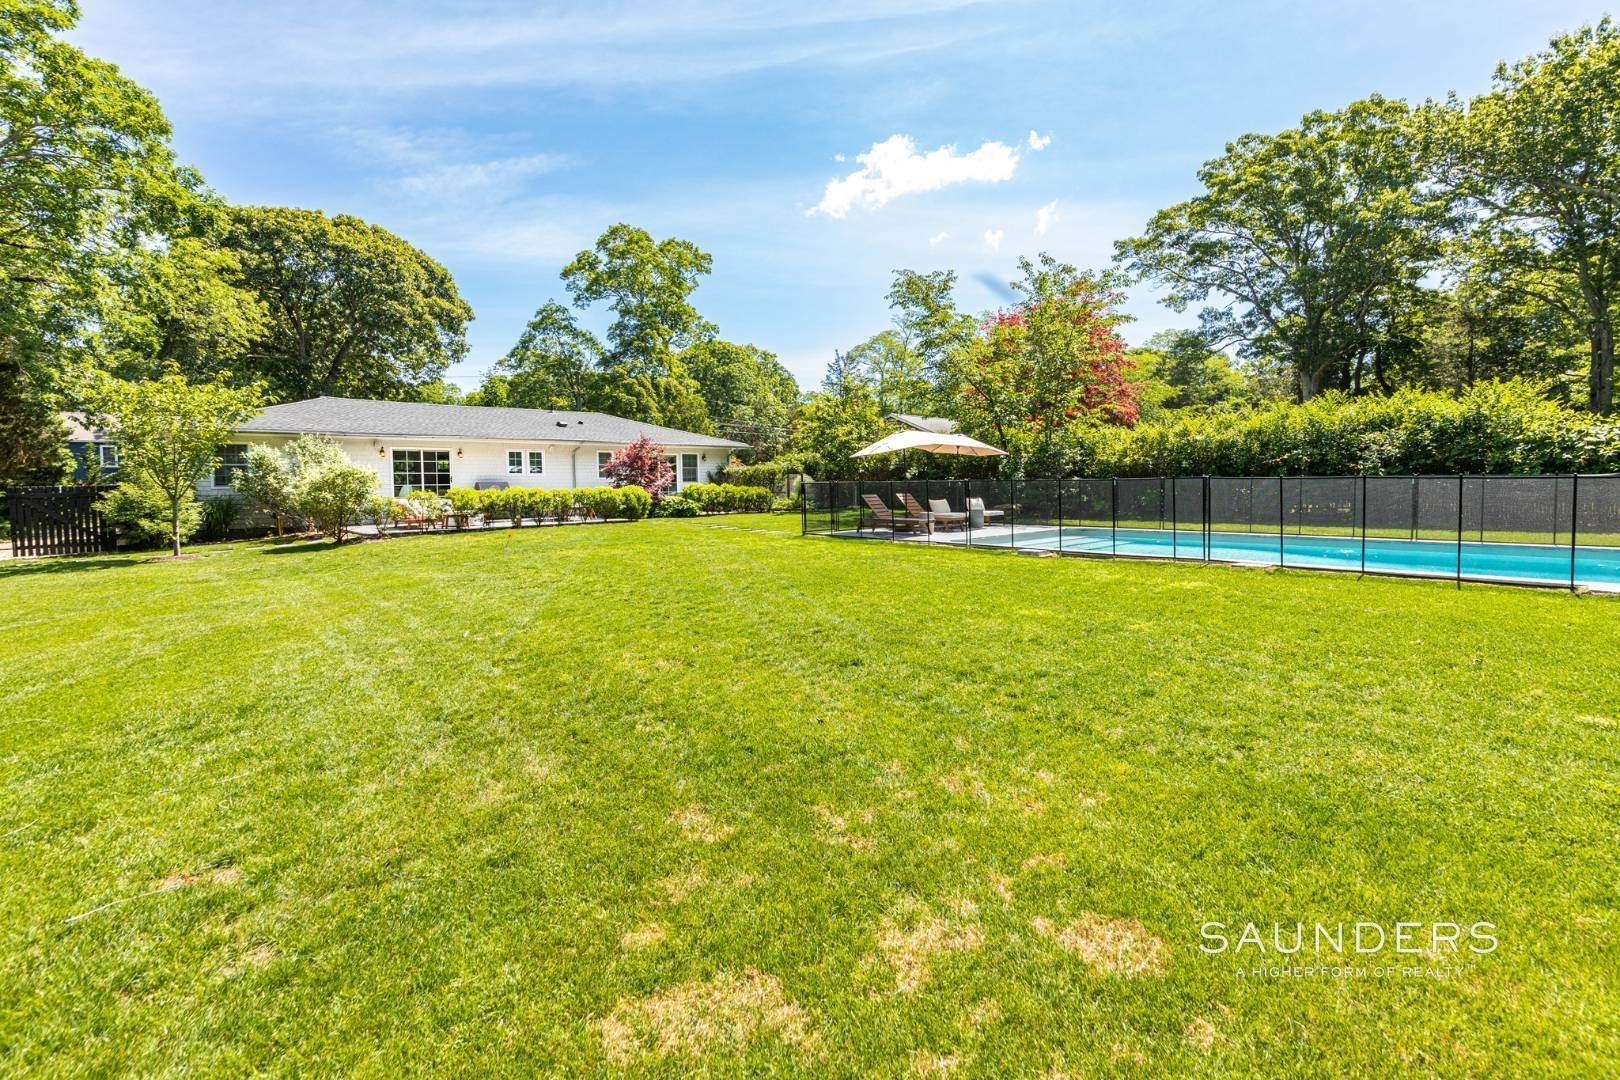 19. Single Family Homes at Spend August In This Renovated Charming Springs Home East Hampton, NY 11937